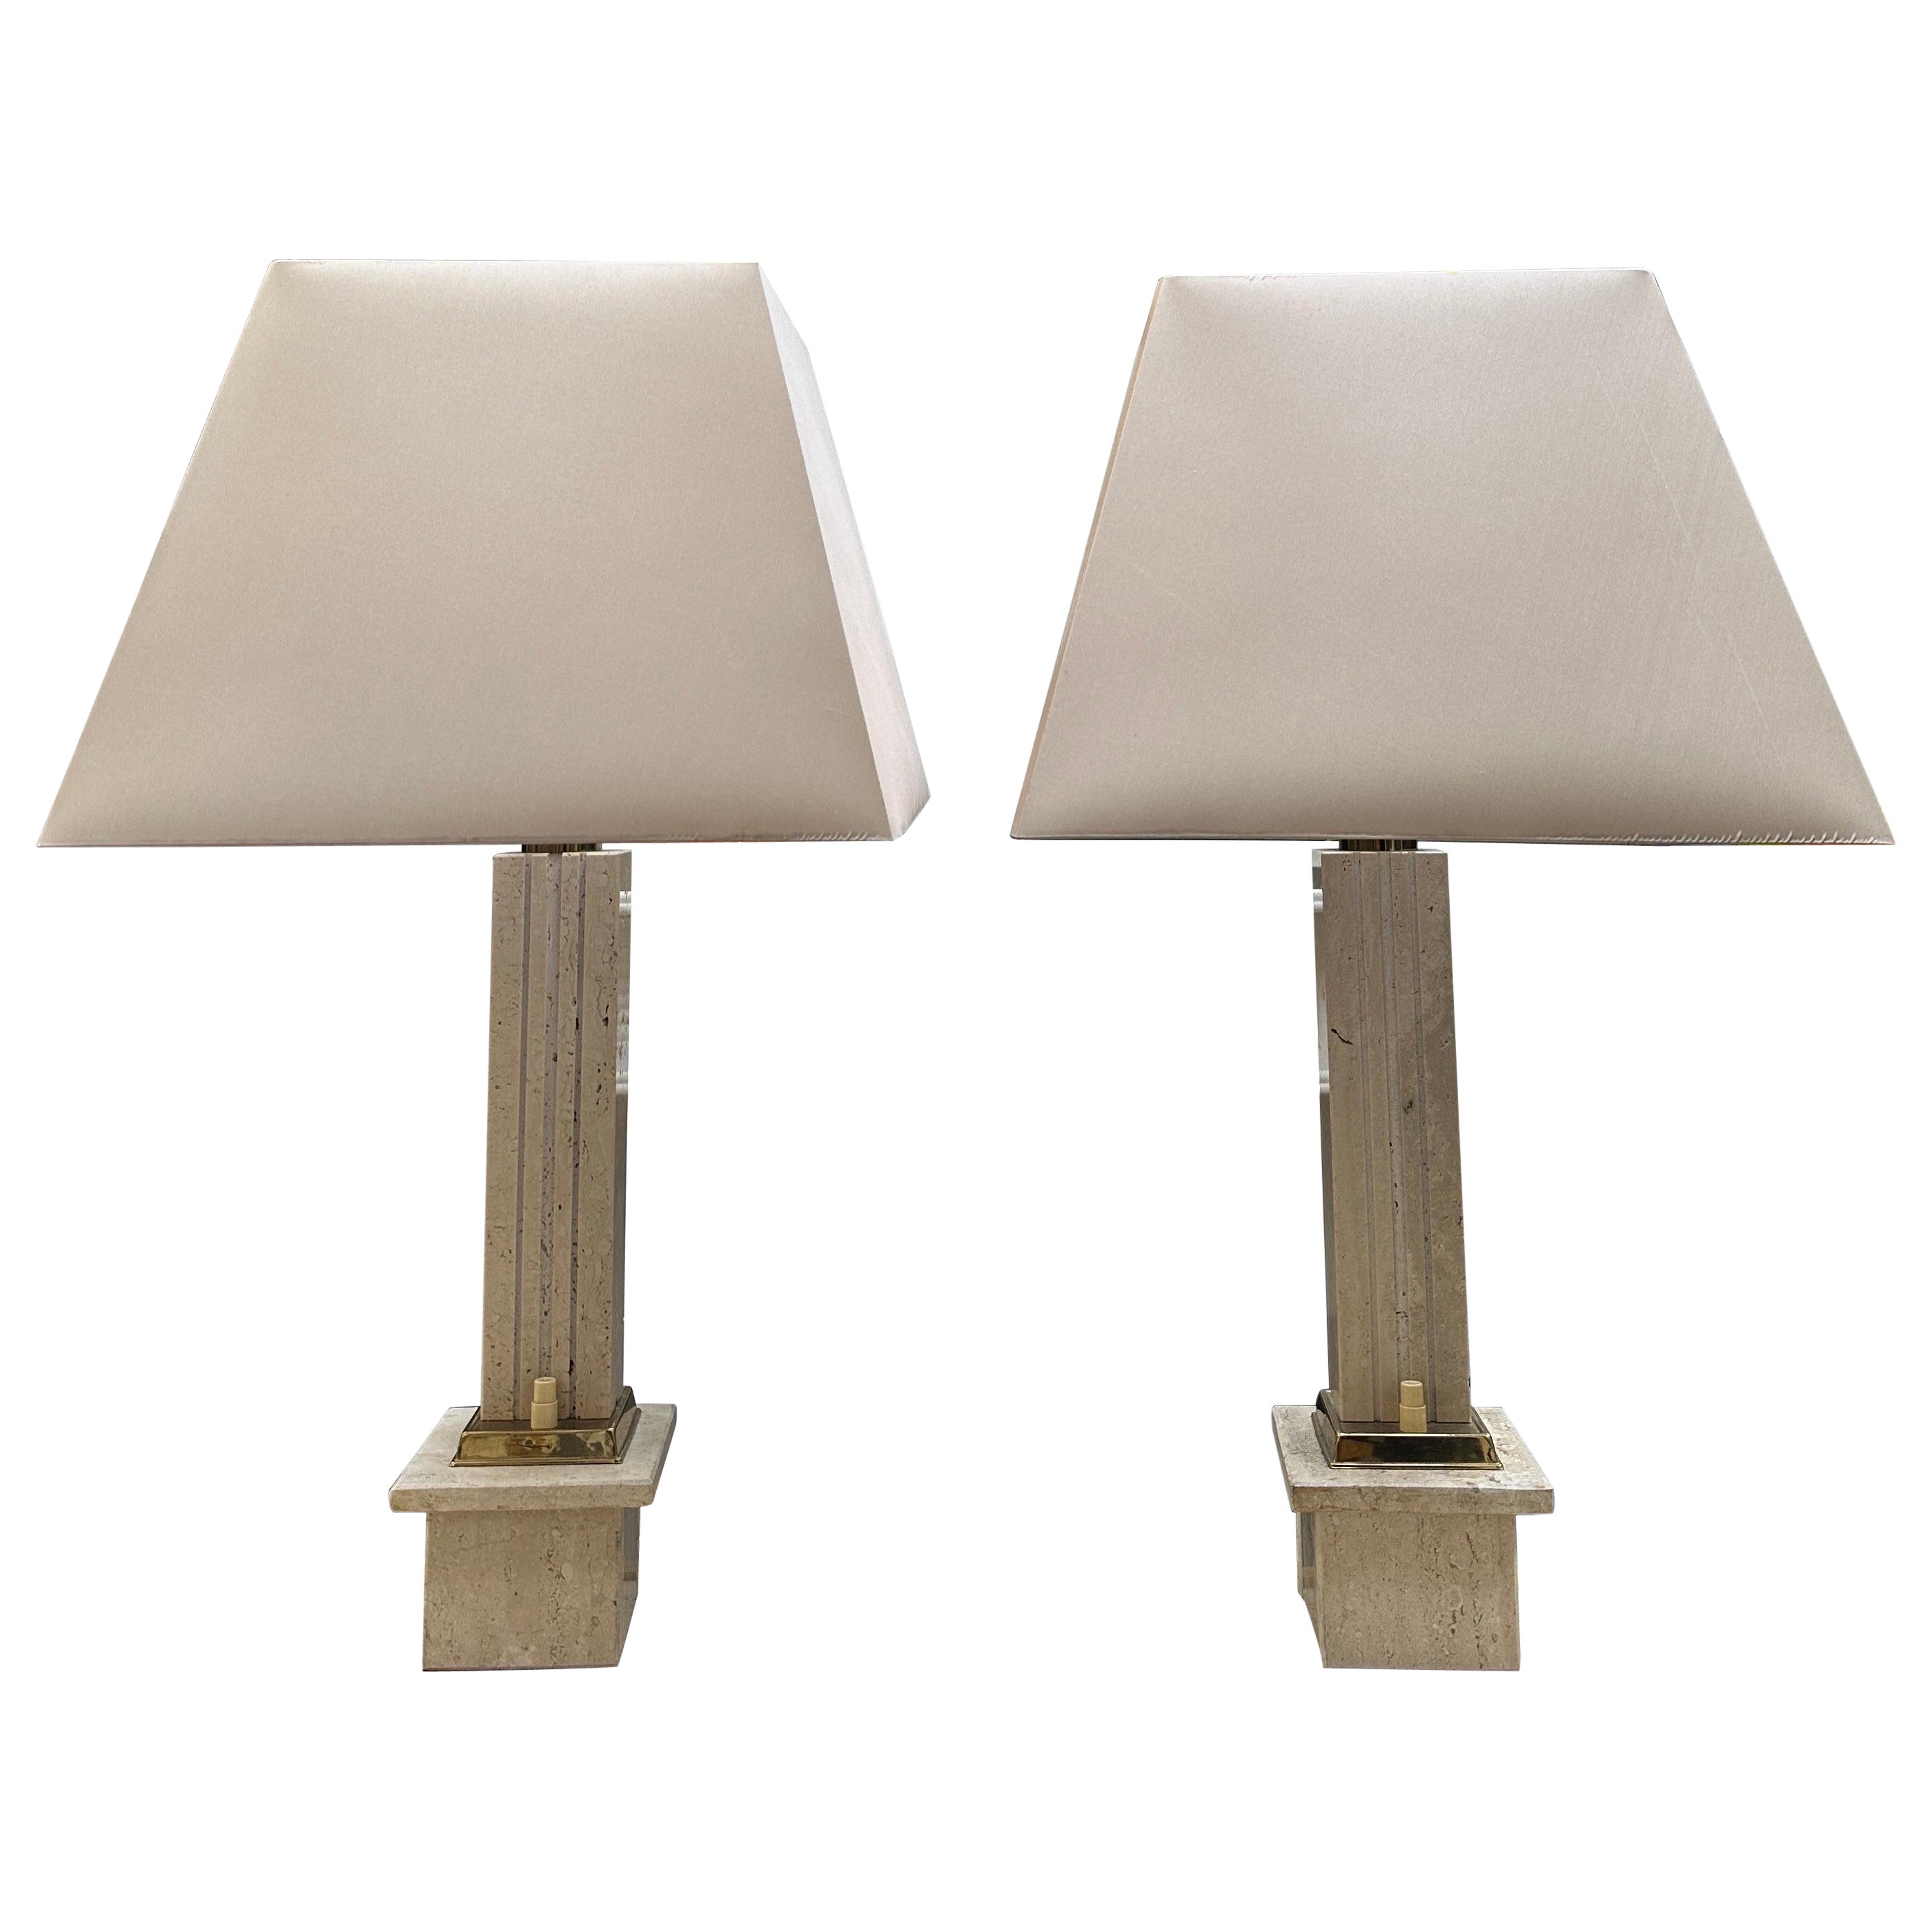 A Pair Of Tall Italian Travertine and Brass Table Lamps  For Sale